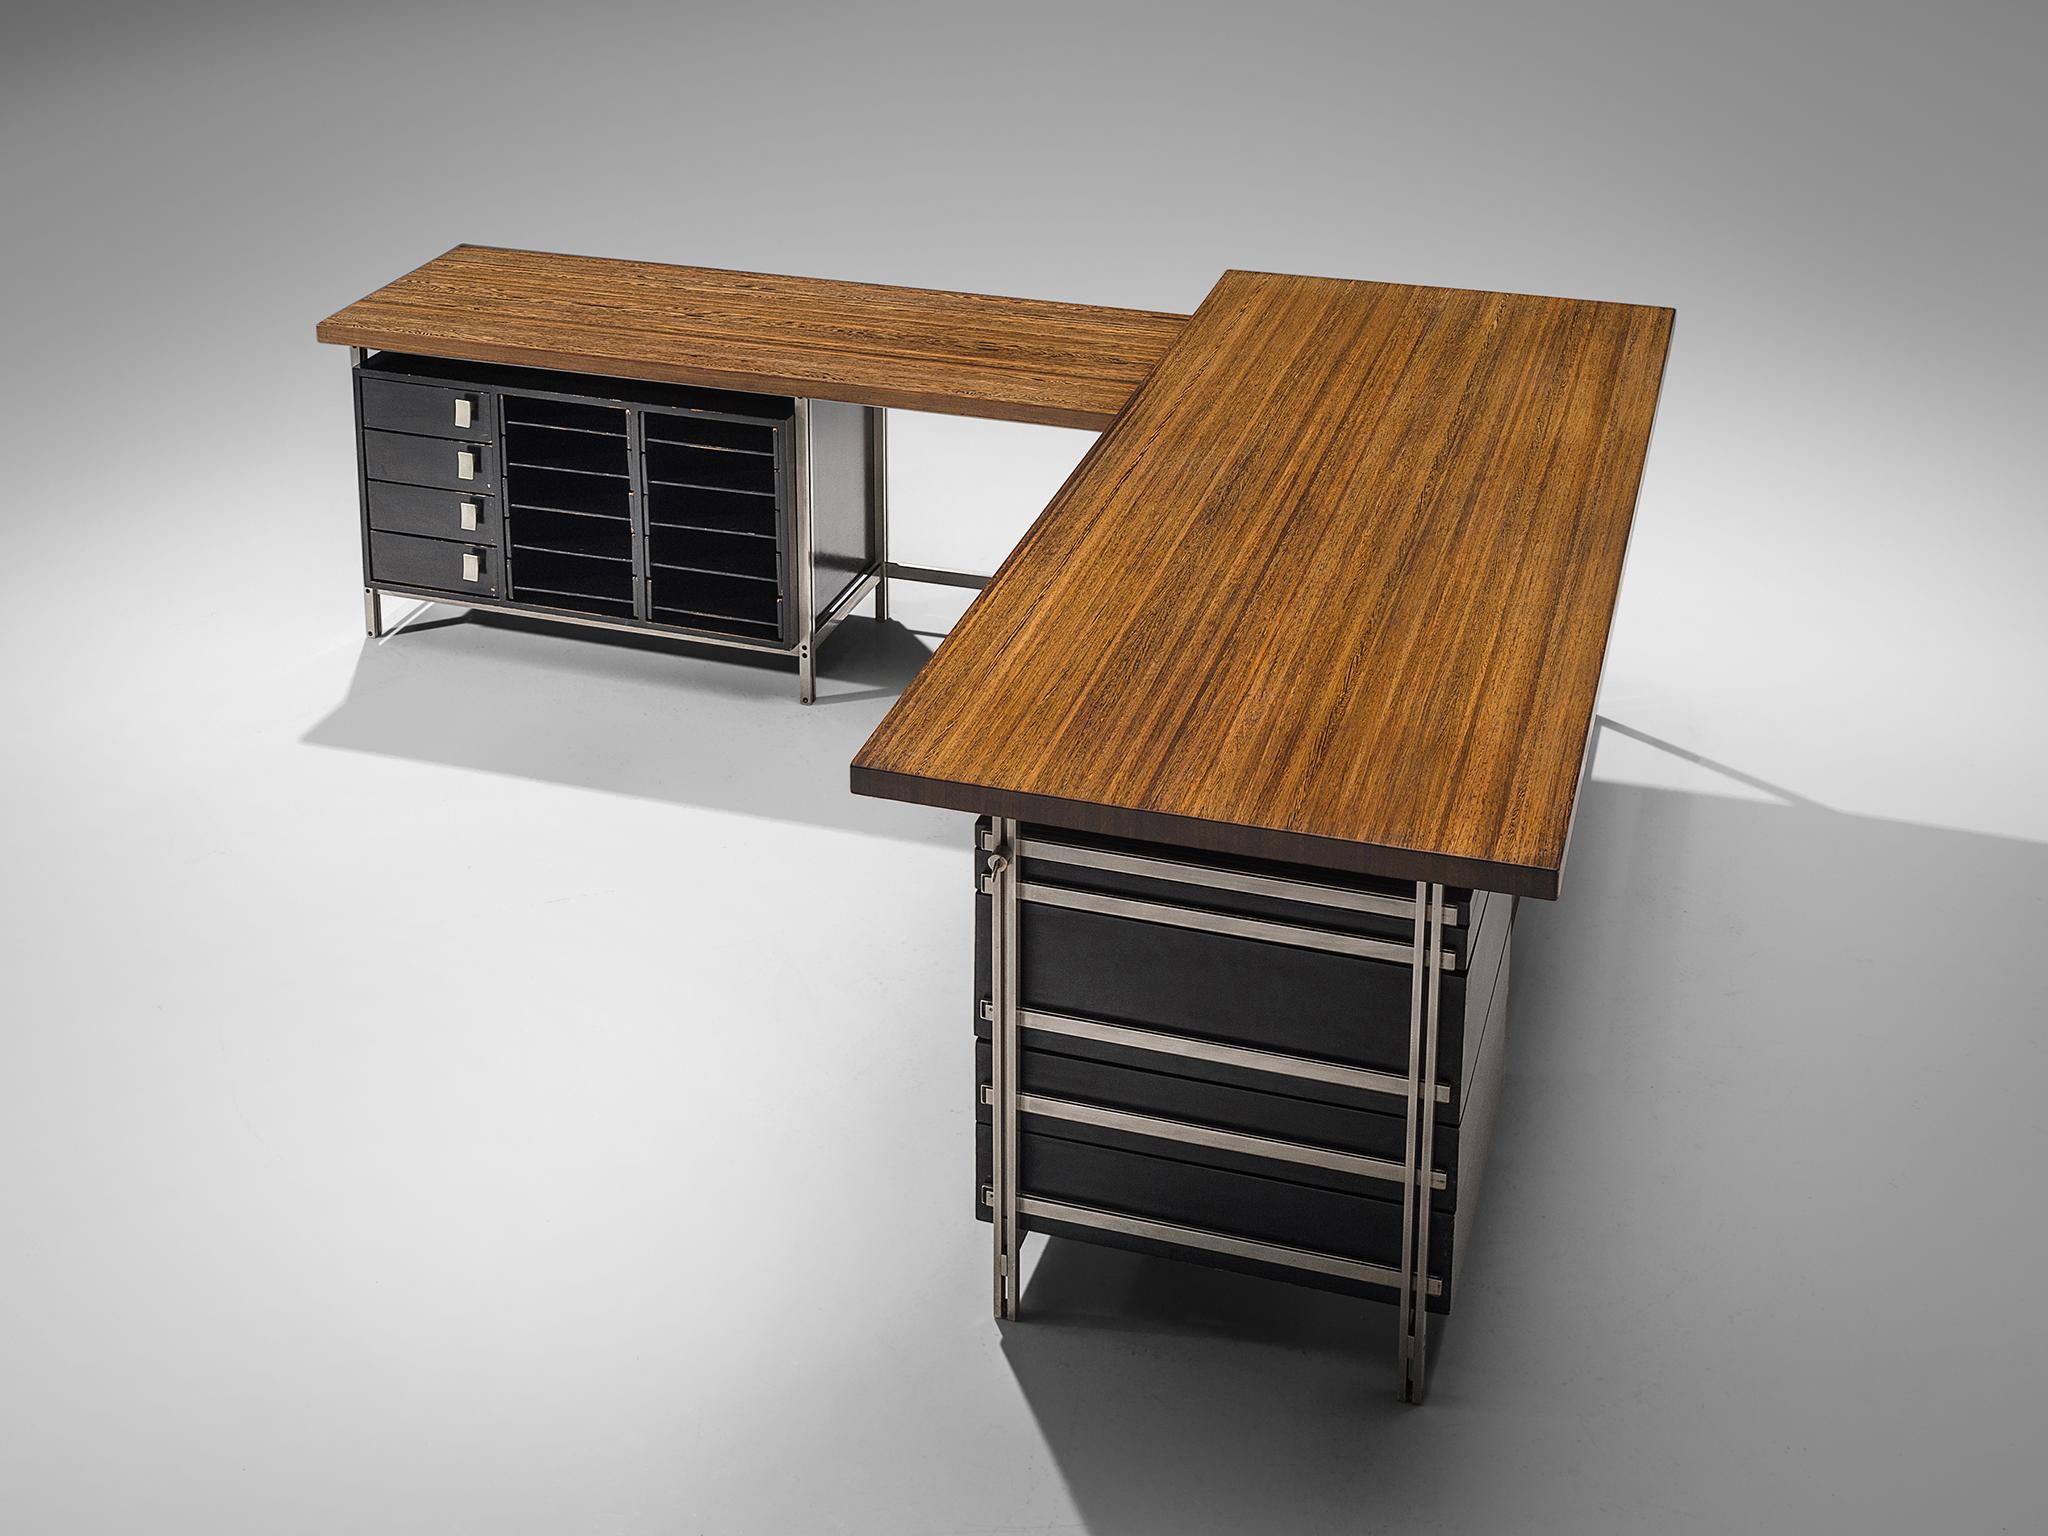 Jules Wabbes, writing desk with drawer pieces, wenge wood tabletop, chrome frame, black drawers, Belgium, 1960s.

This corner desk is designed by Jules Wabbes. The table is executed with a solid wenge wooden top, made out of tangentially-sawn wenge